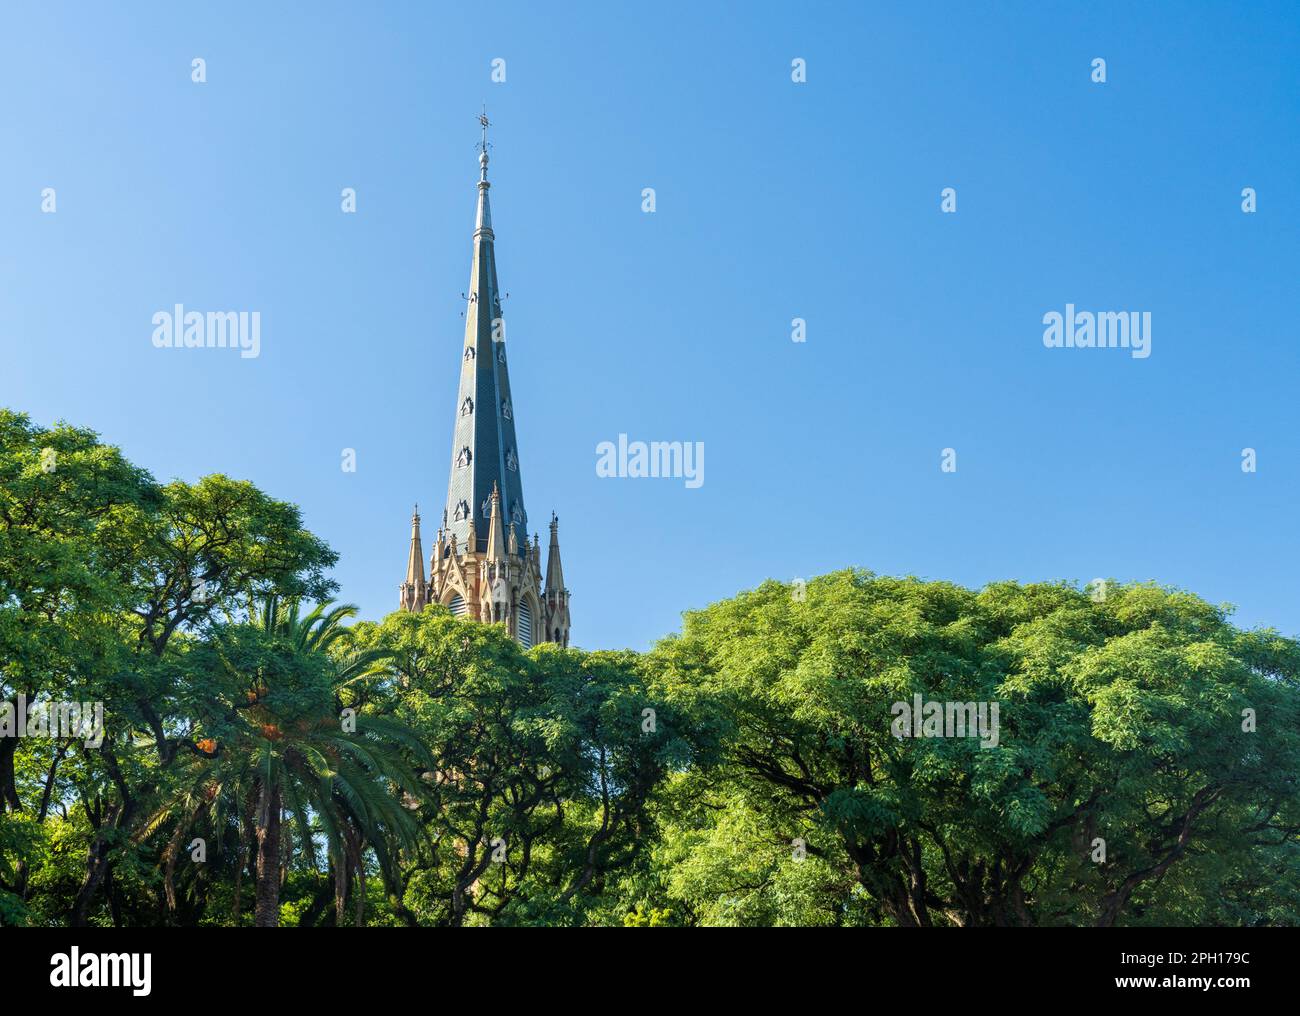 Leafy view of the tall church spire and clock tower of San Isidro cathedral near Buenos Aires in Argentina Stock Photo